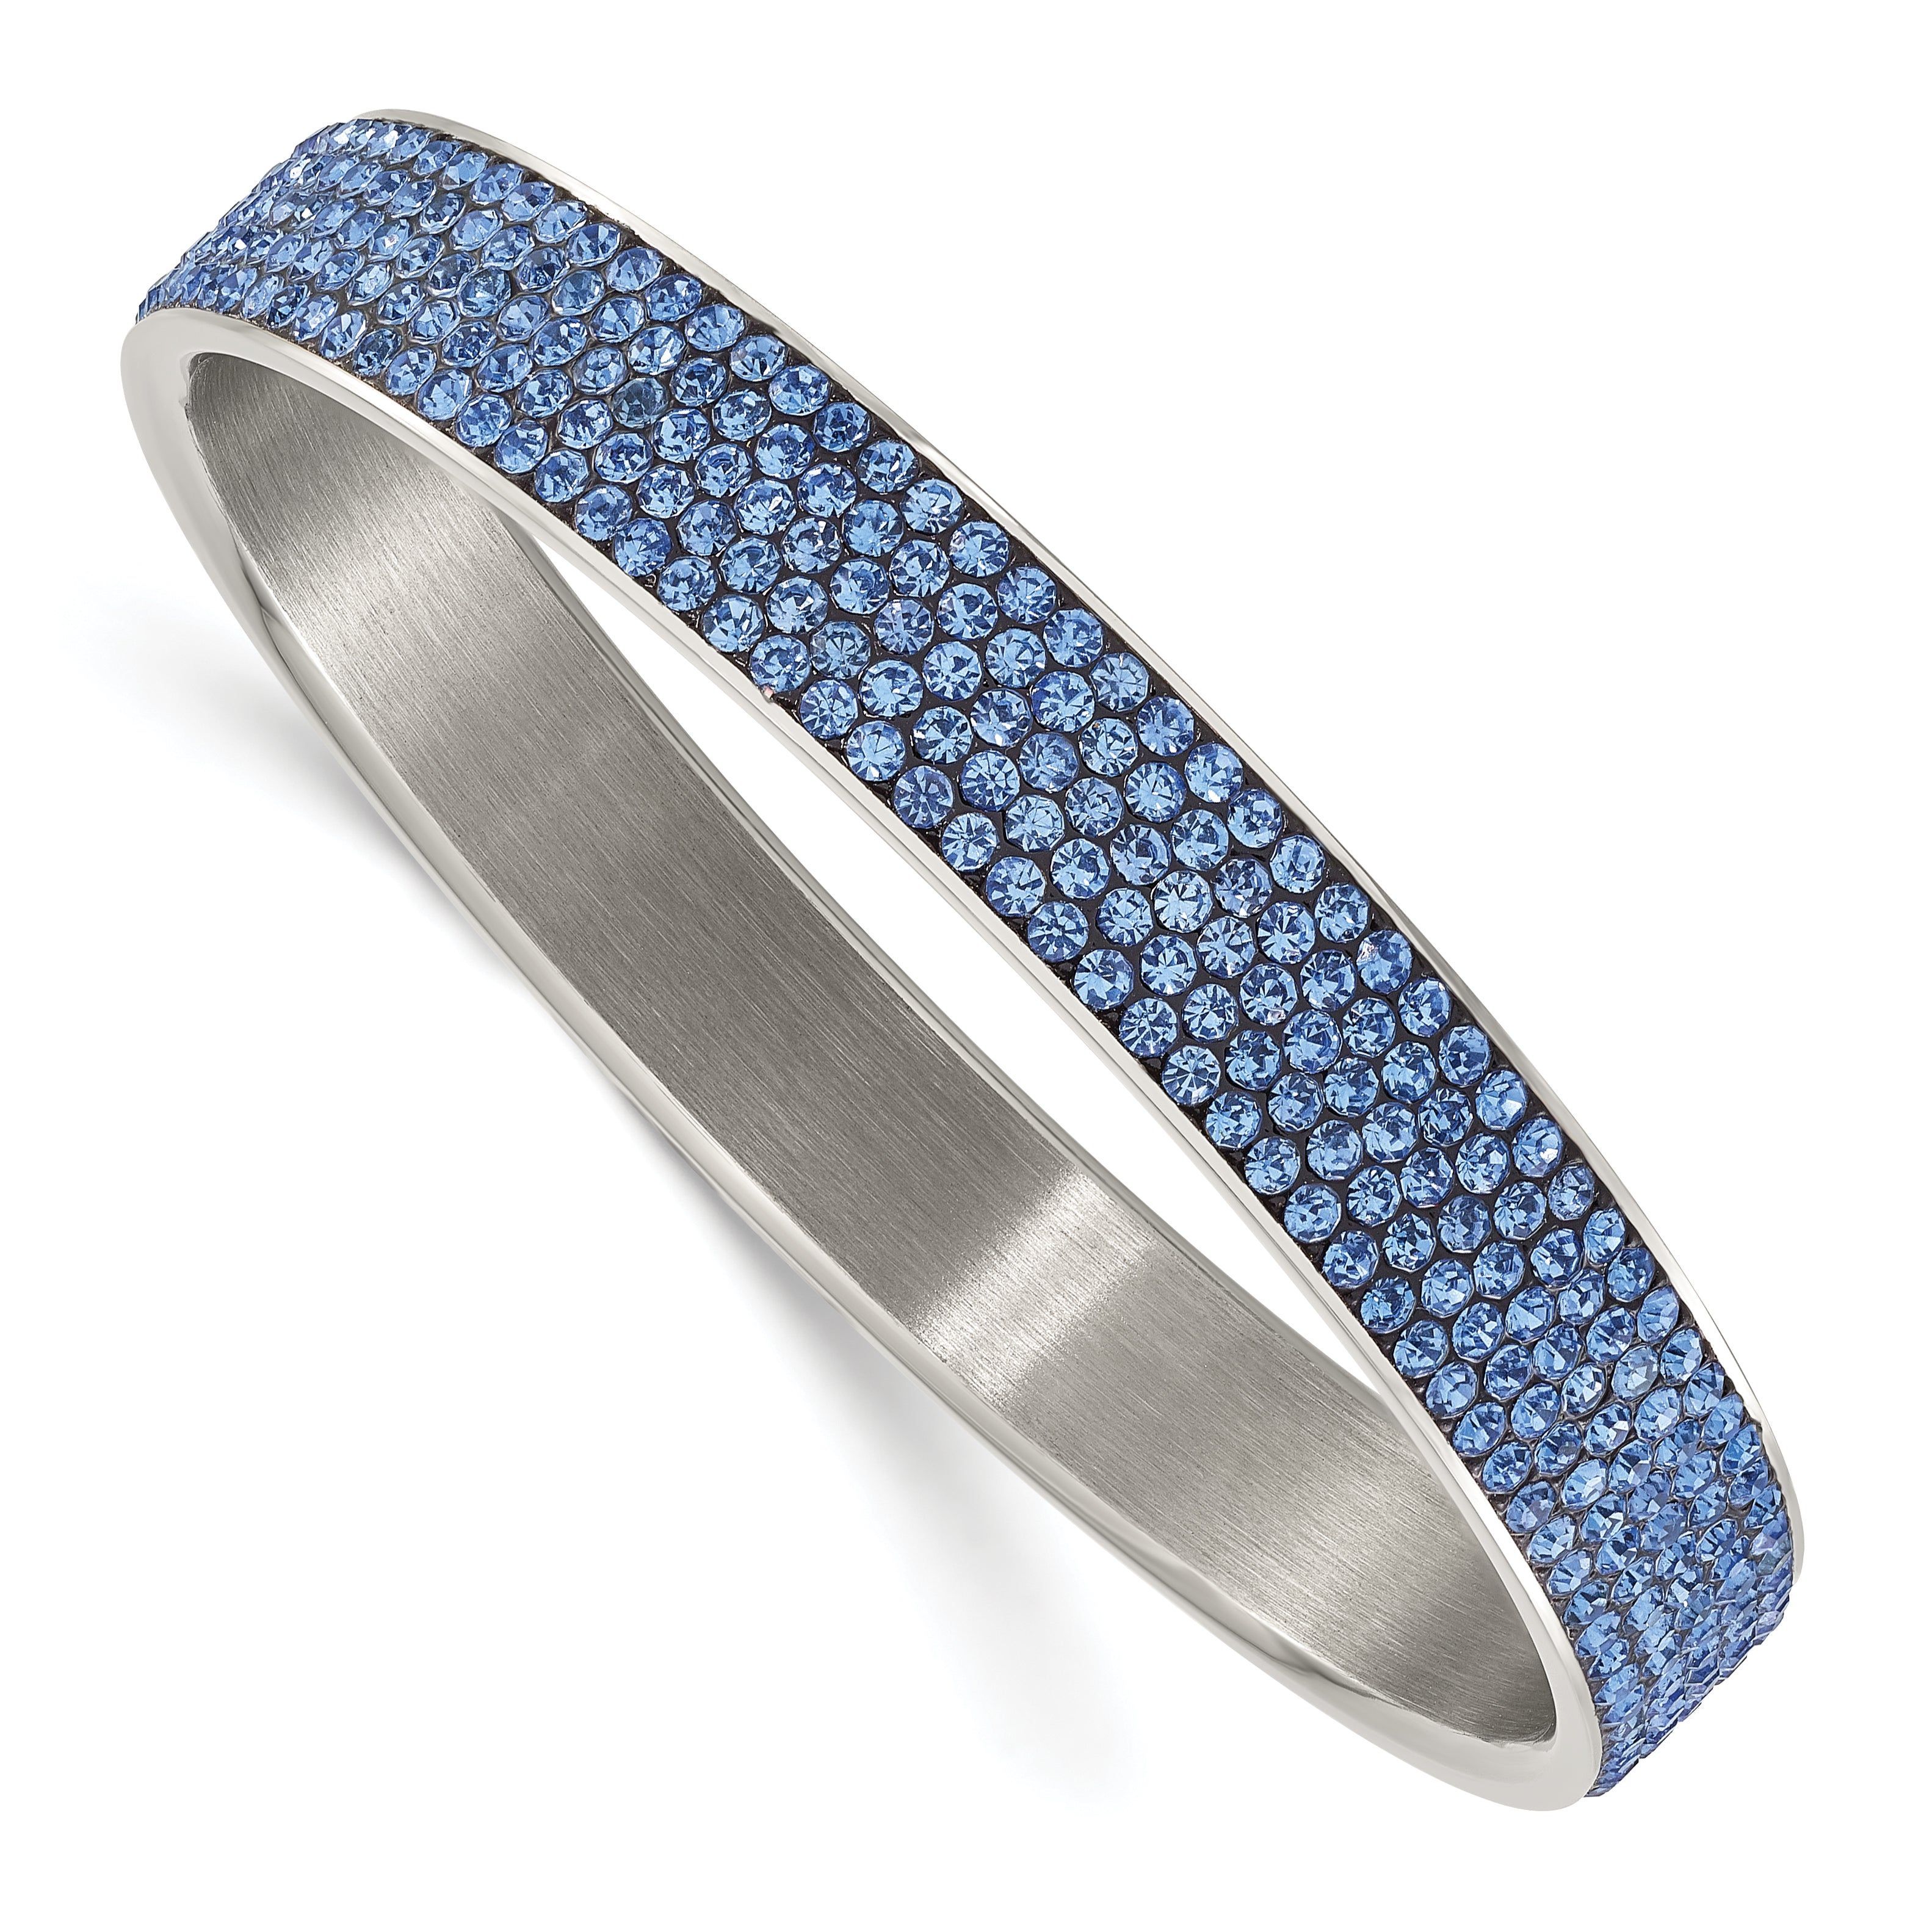 Stainless Steel Polished Blue Crystal Thin Flat Bangle